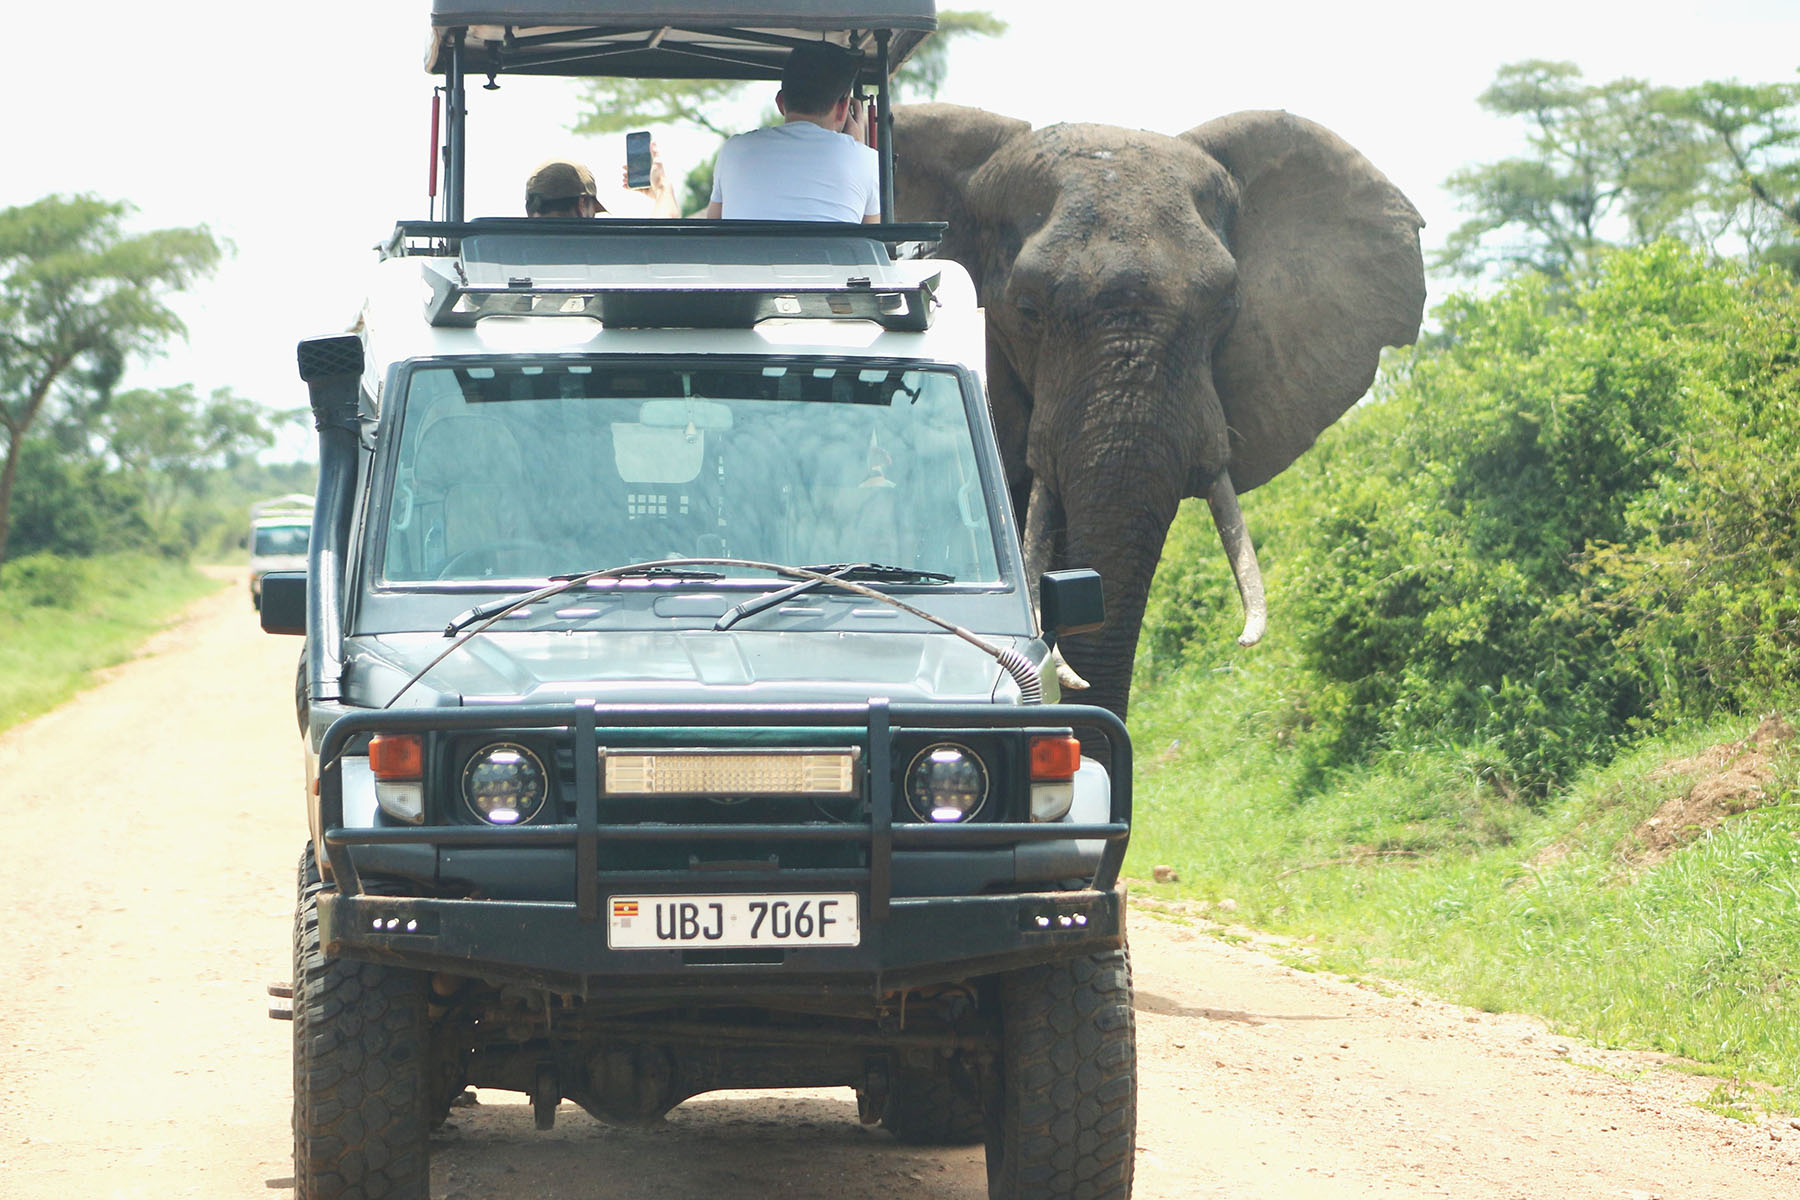 Elephants looks at the car without any threat.